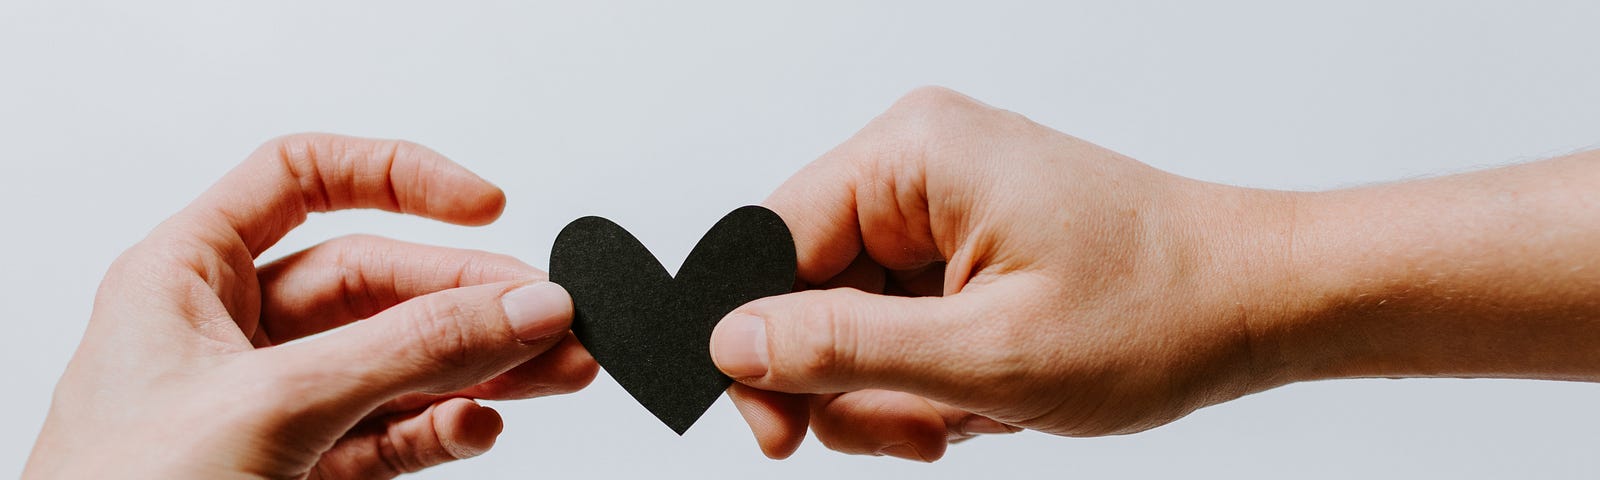 One hand reaches out from the left side of this image to recieve a black cutout heart being handed to them by somone else on the right. The background is a plain white.